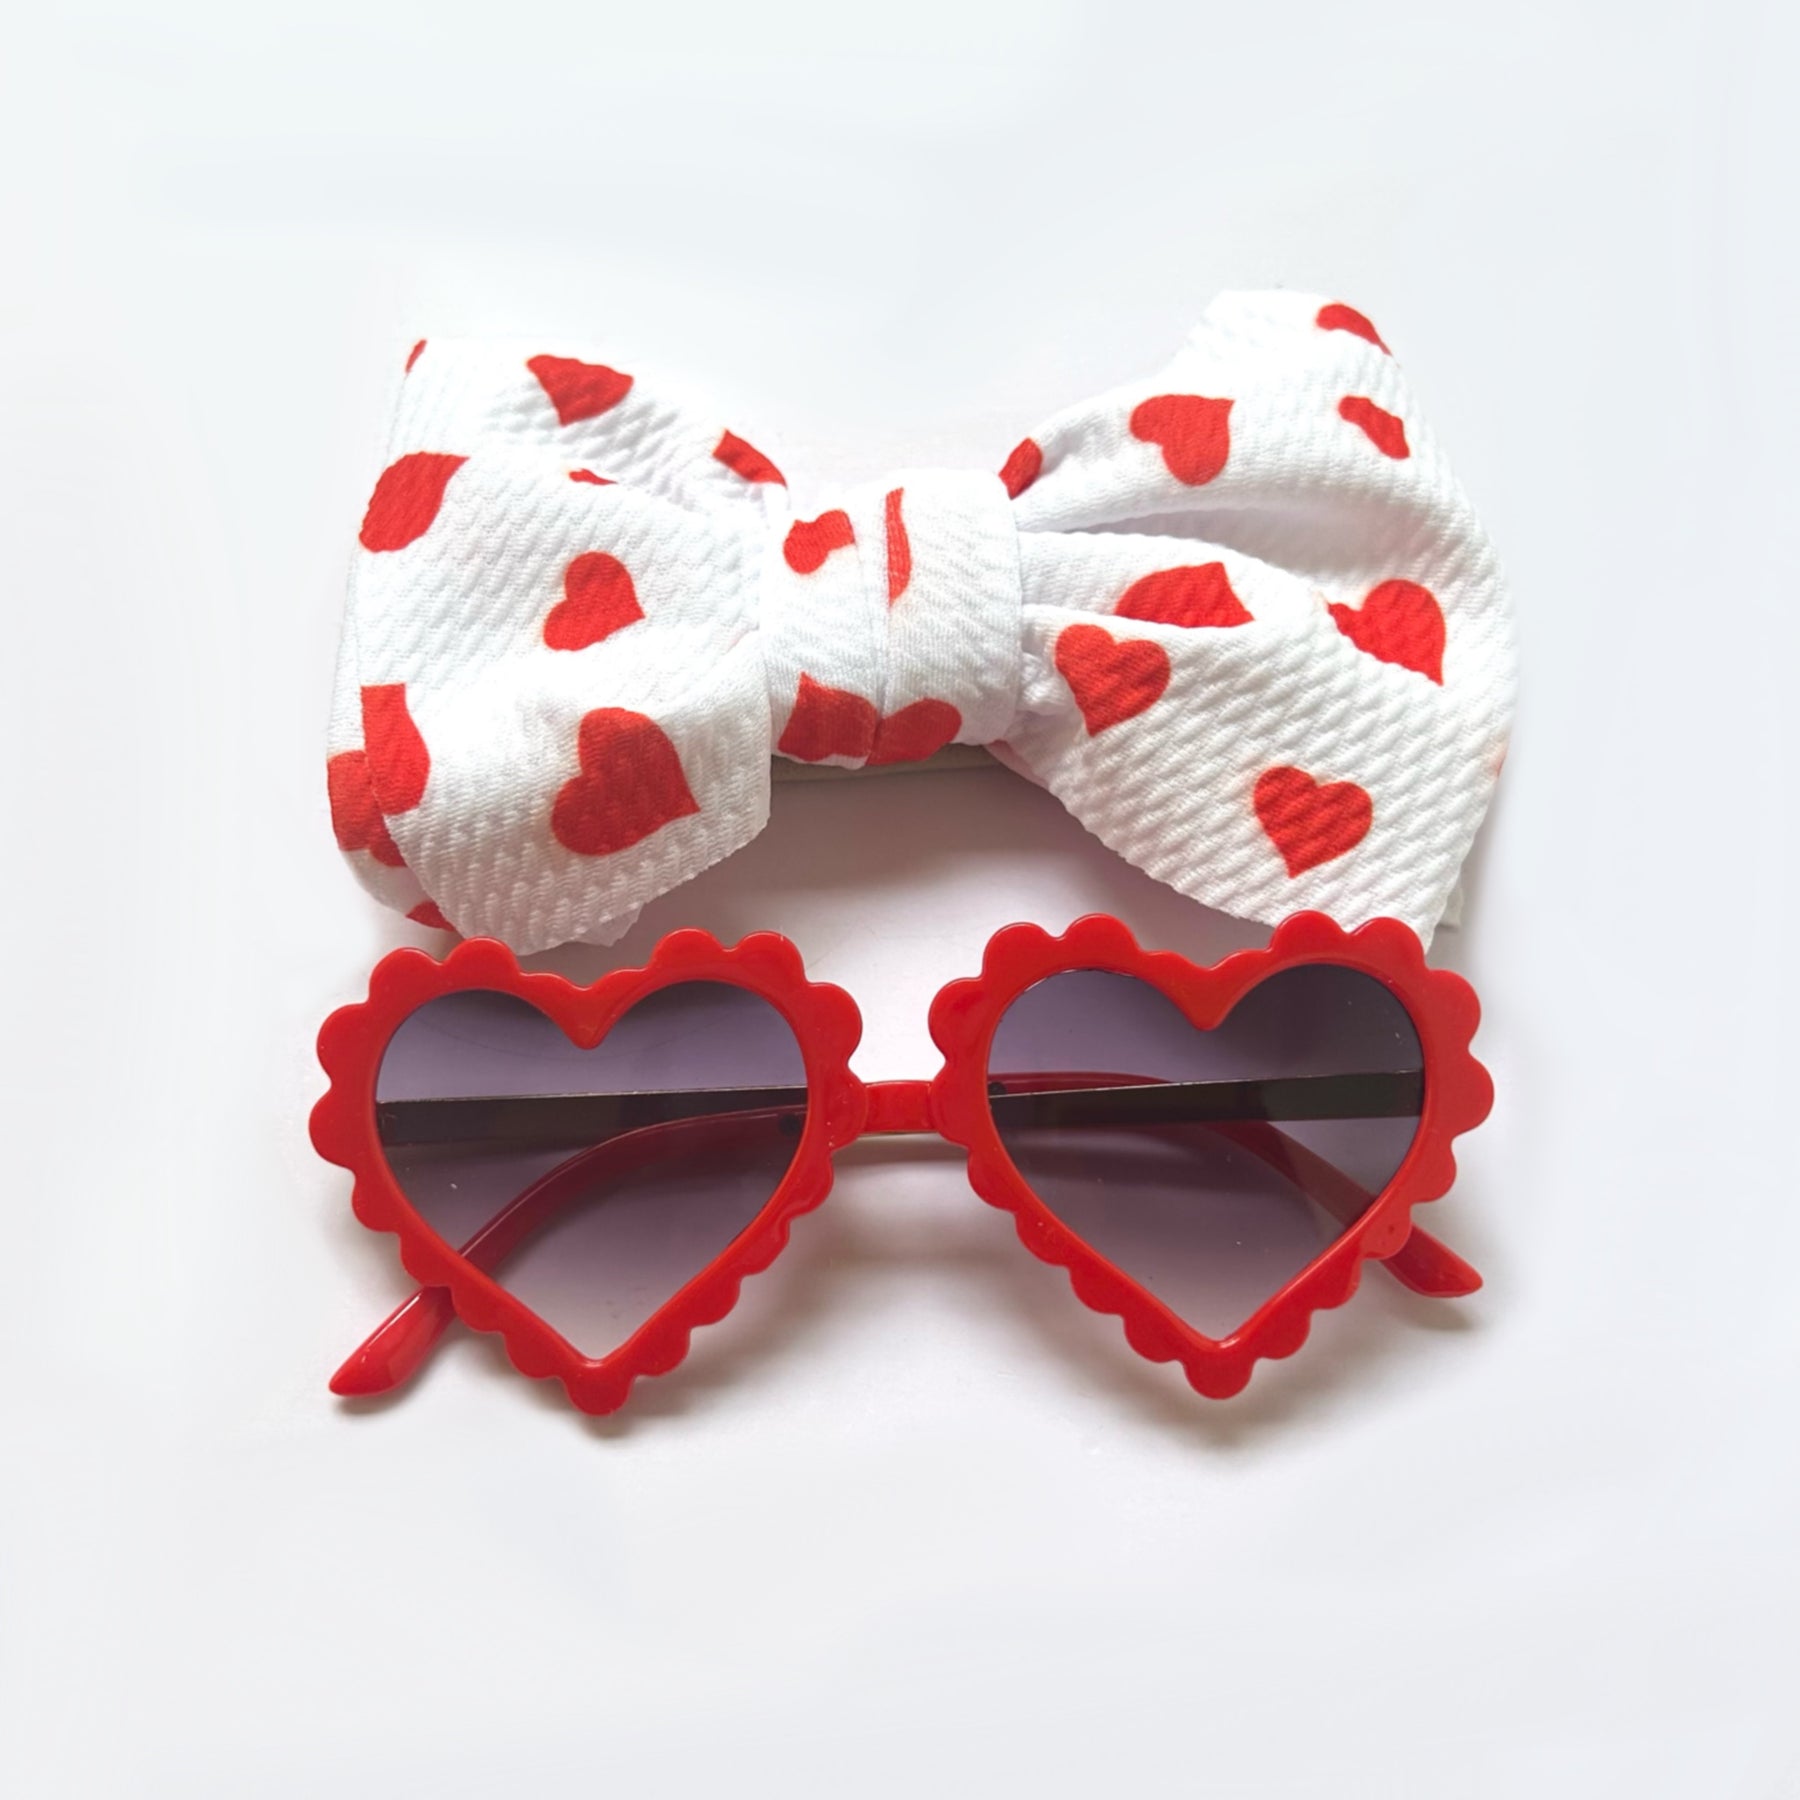 RED HEART GLASSES + BOW